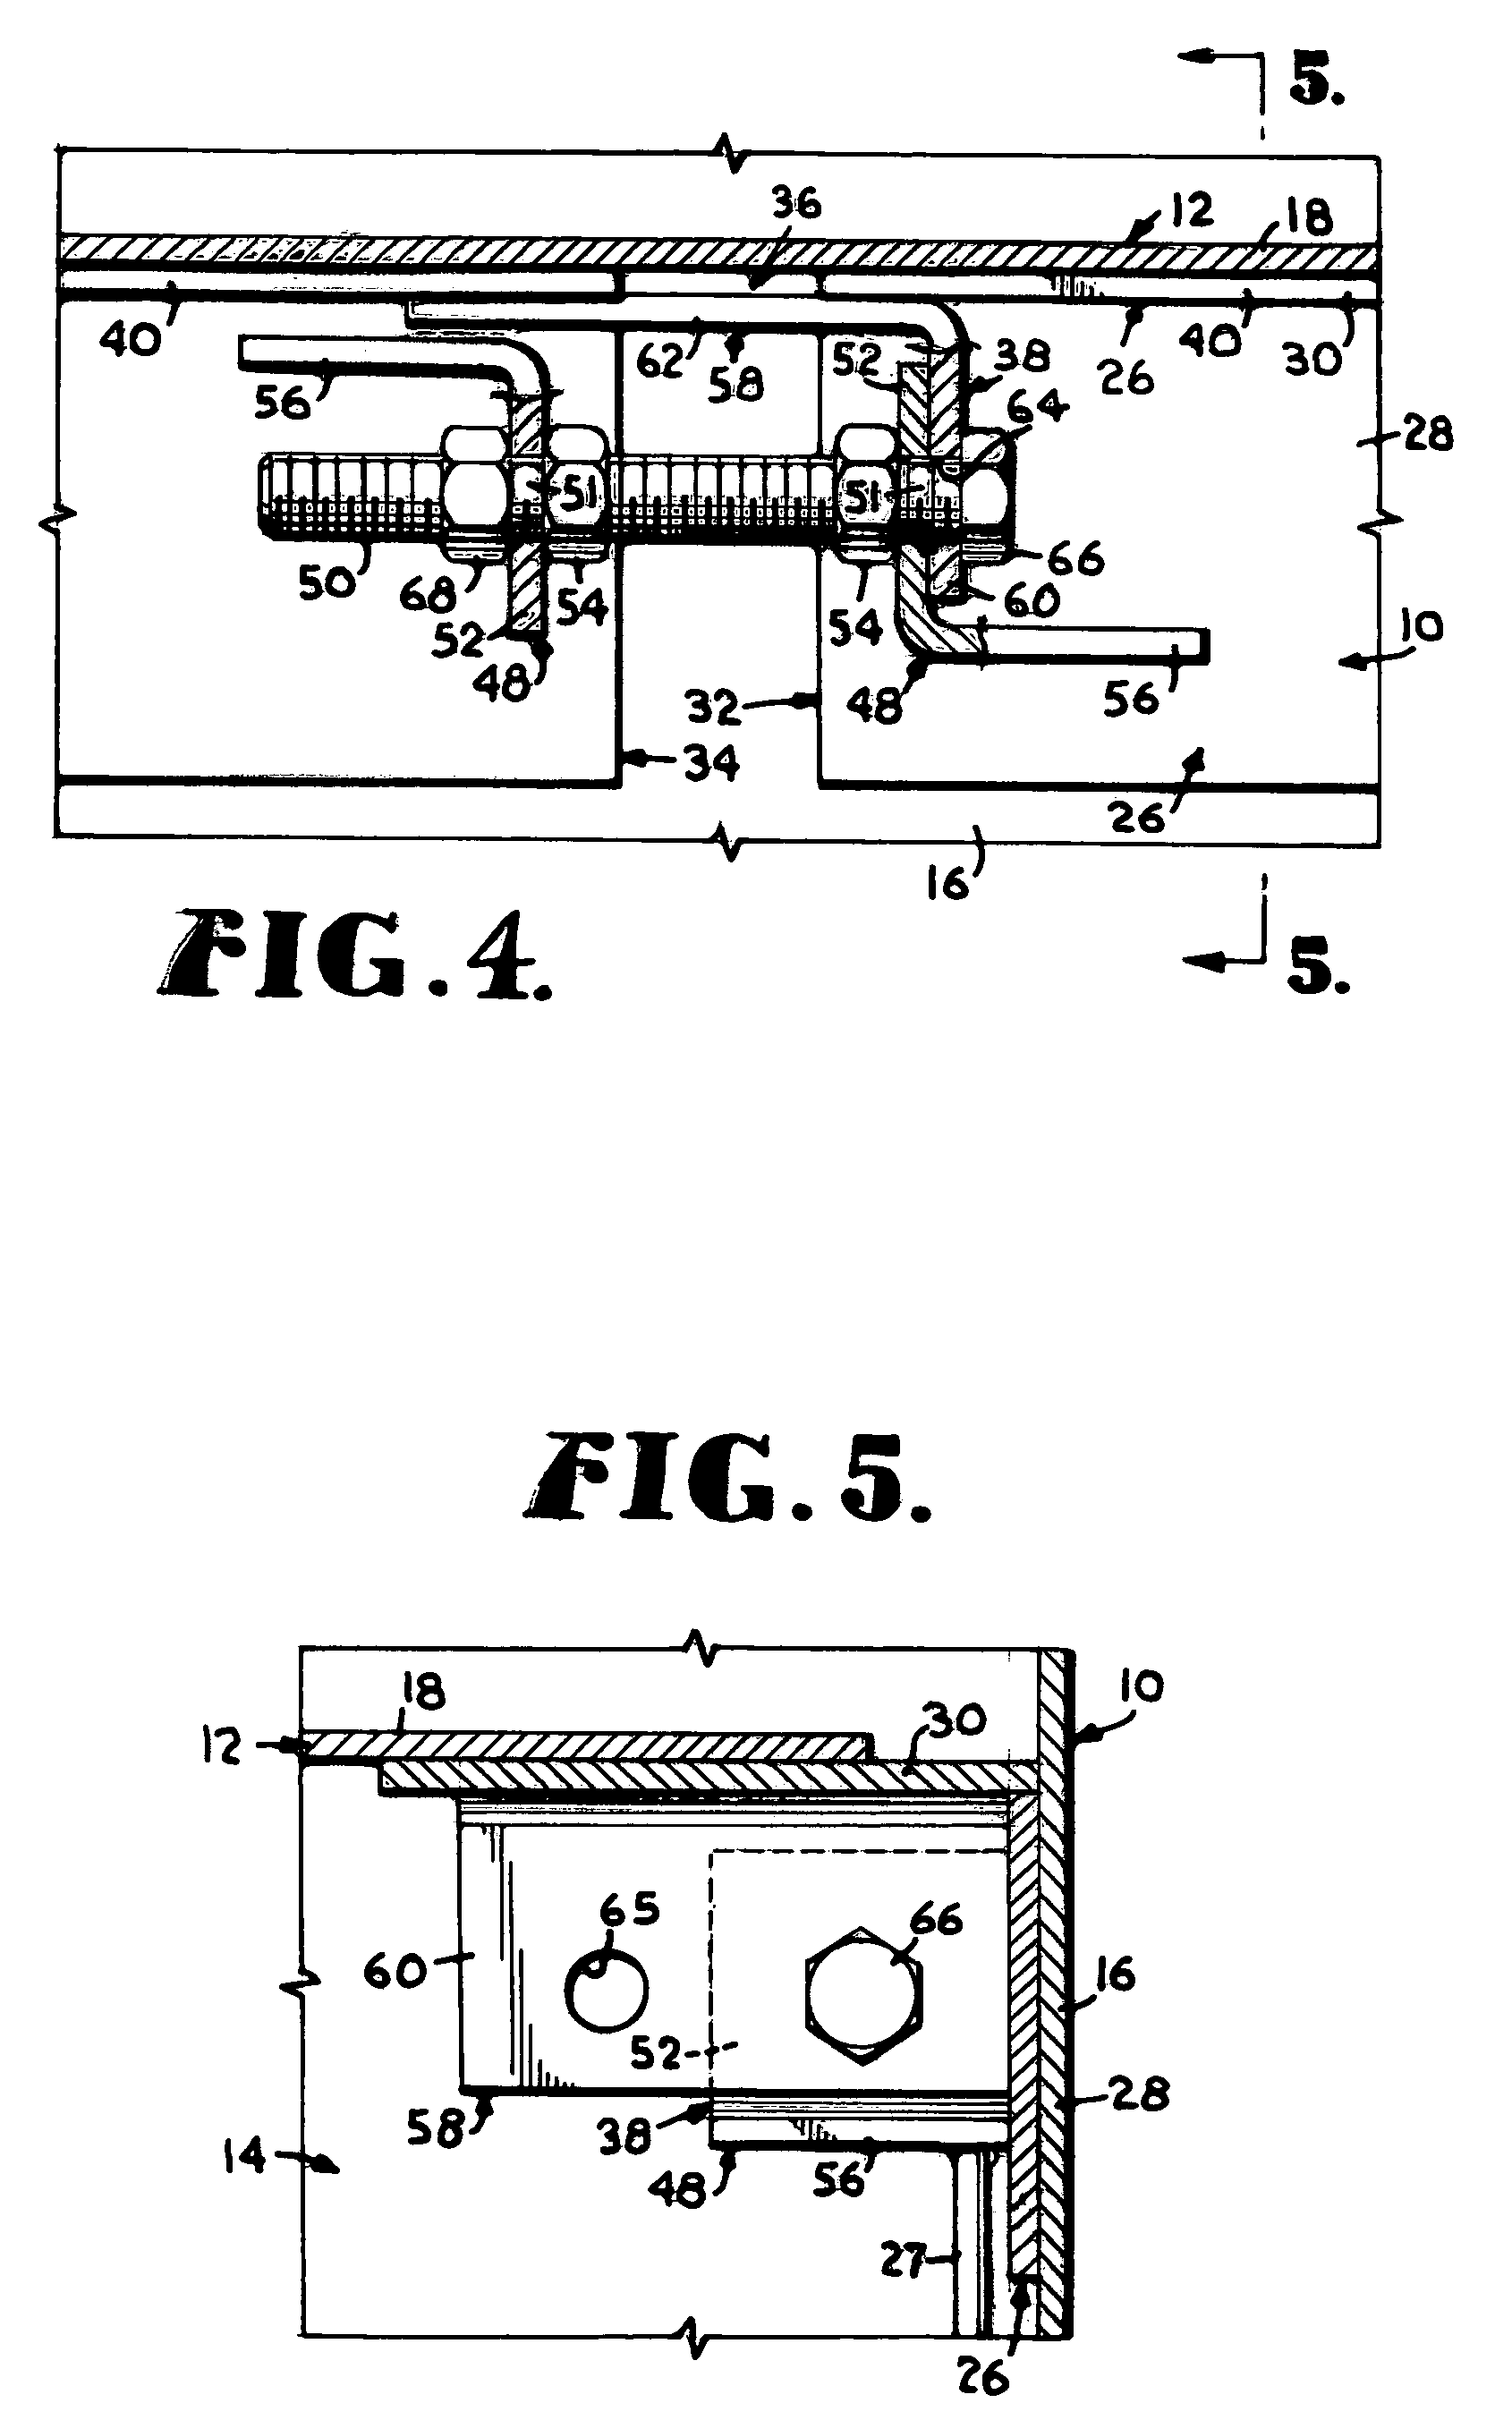 Expansion ring for mass transfer column and method employing same